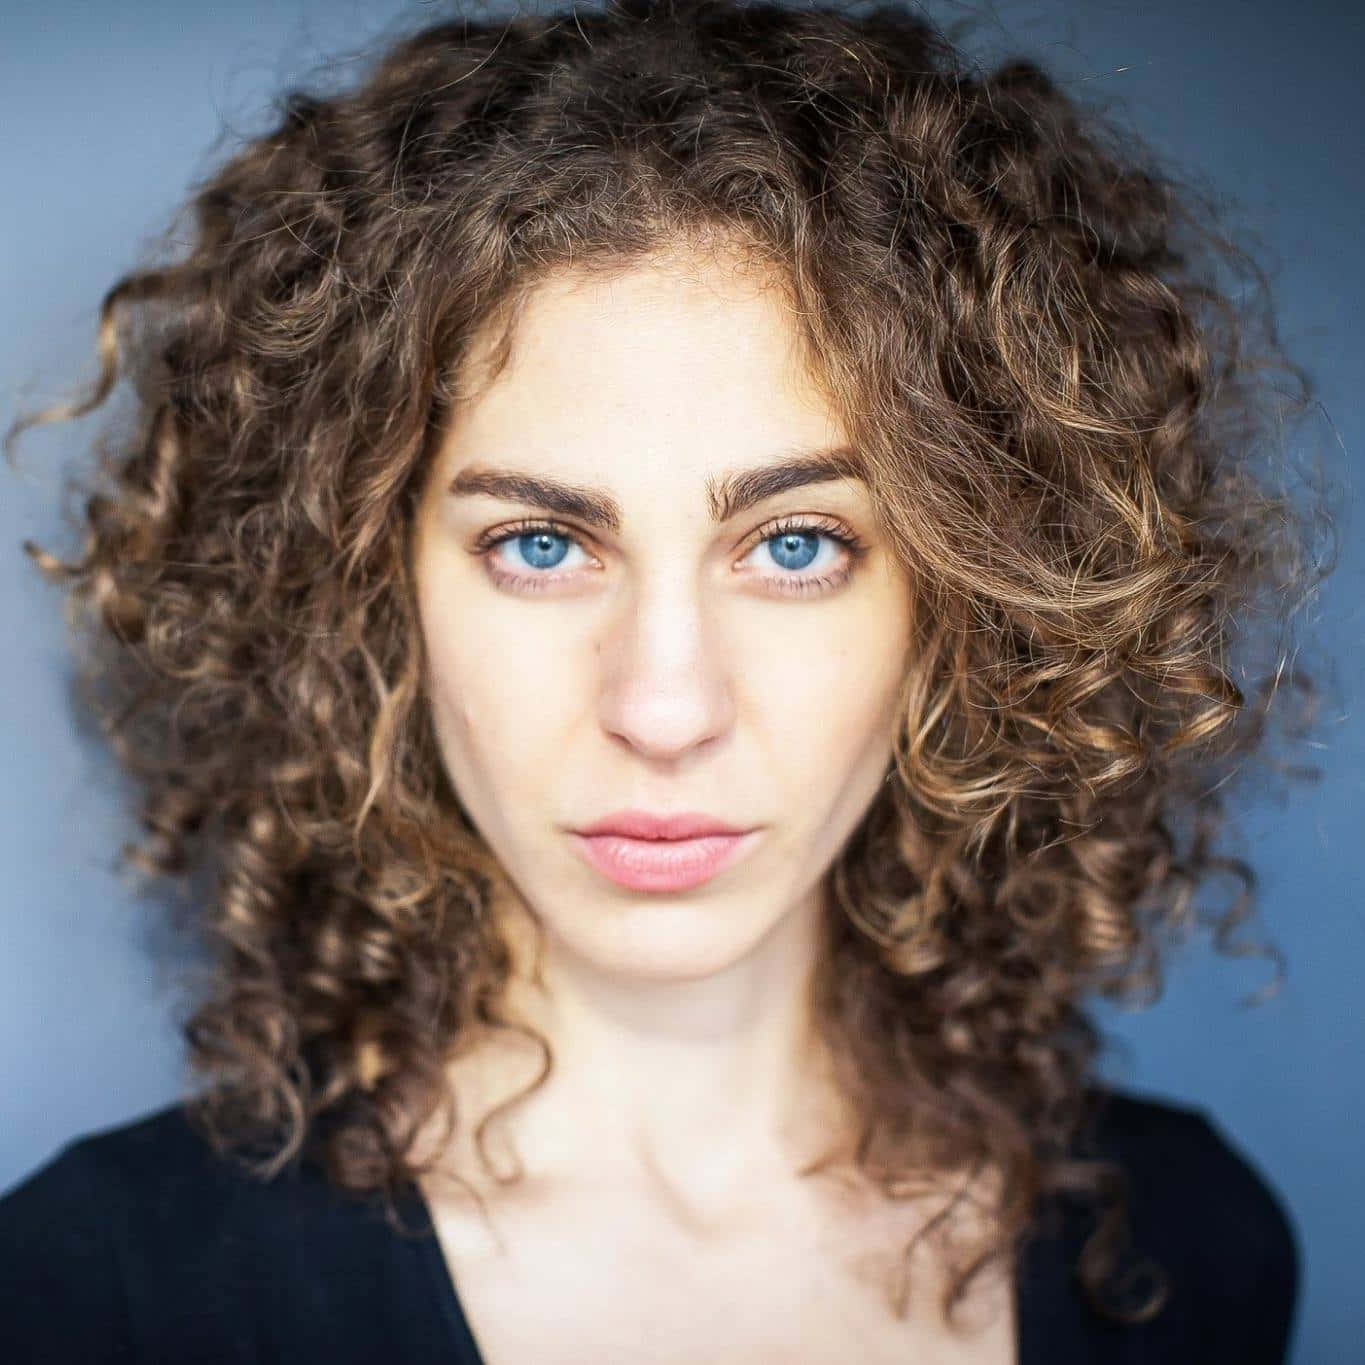 Curly Haired Woman With Blue Eyes Portrait Wallpaper